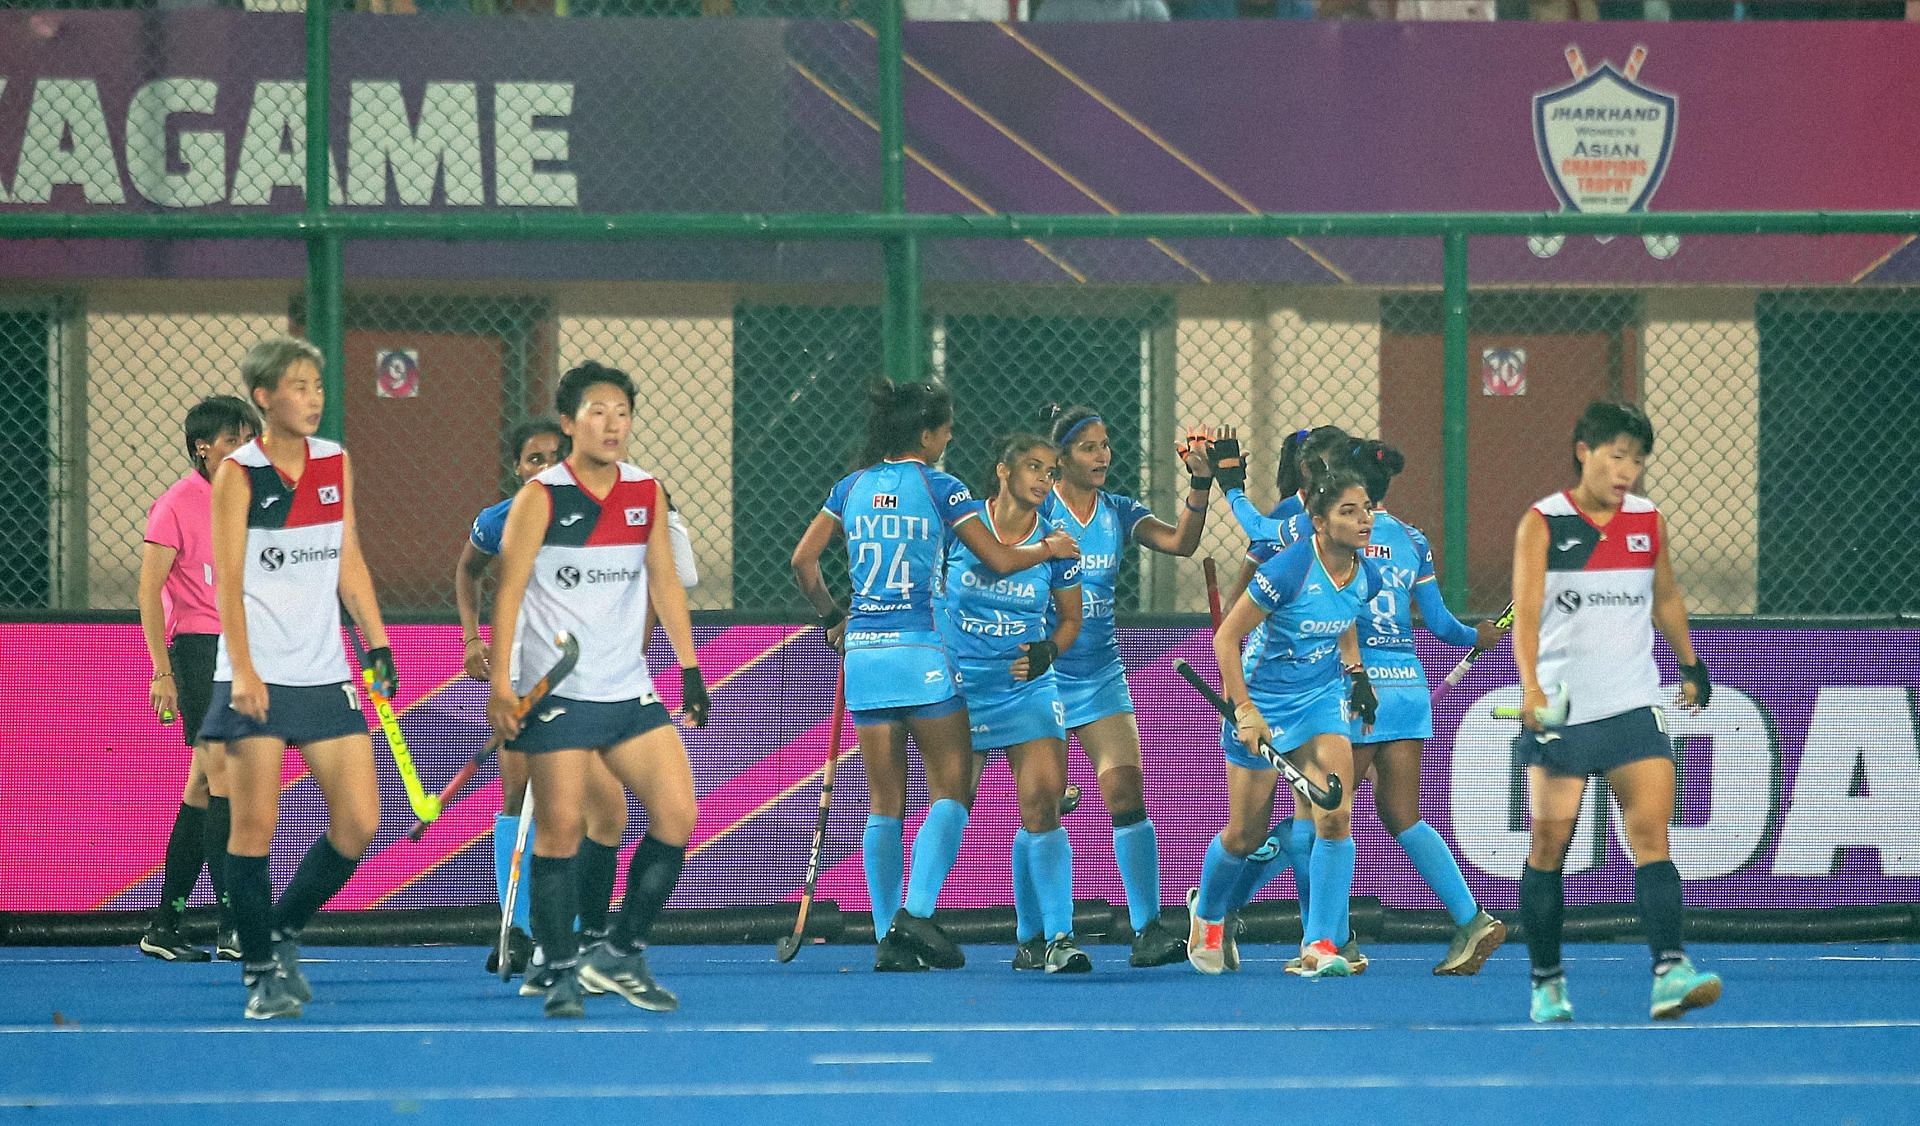 Indian Team celebrating a goal against Korea (Picture Credits: Hockey India)